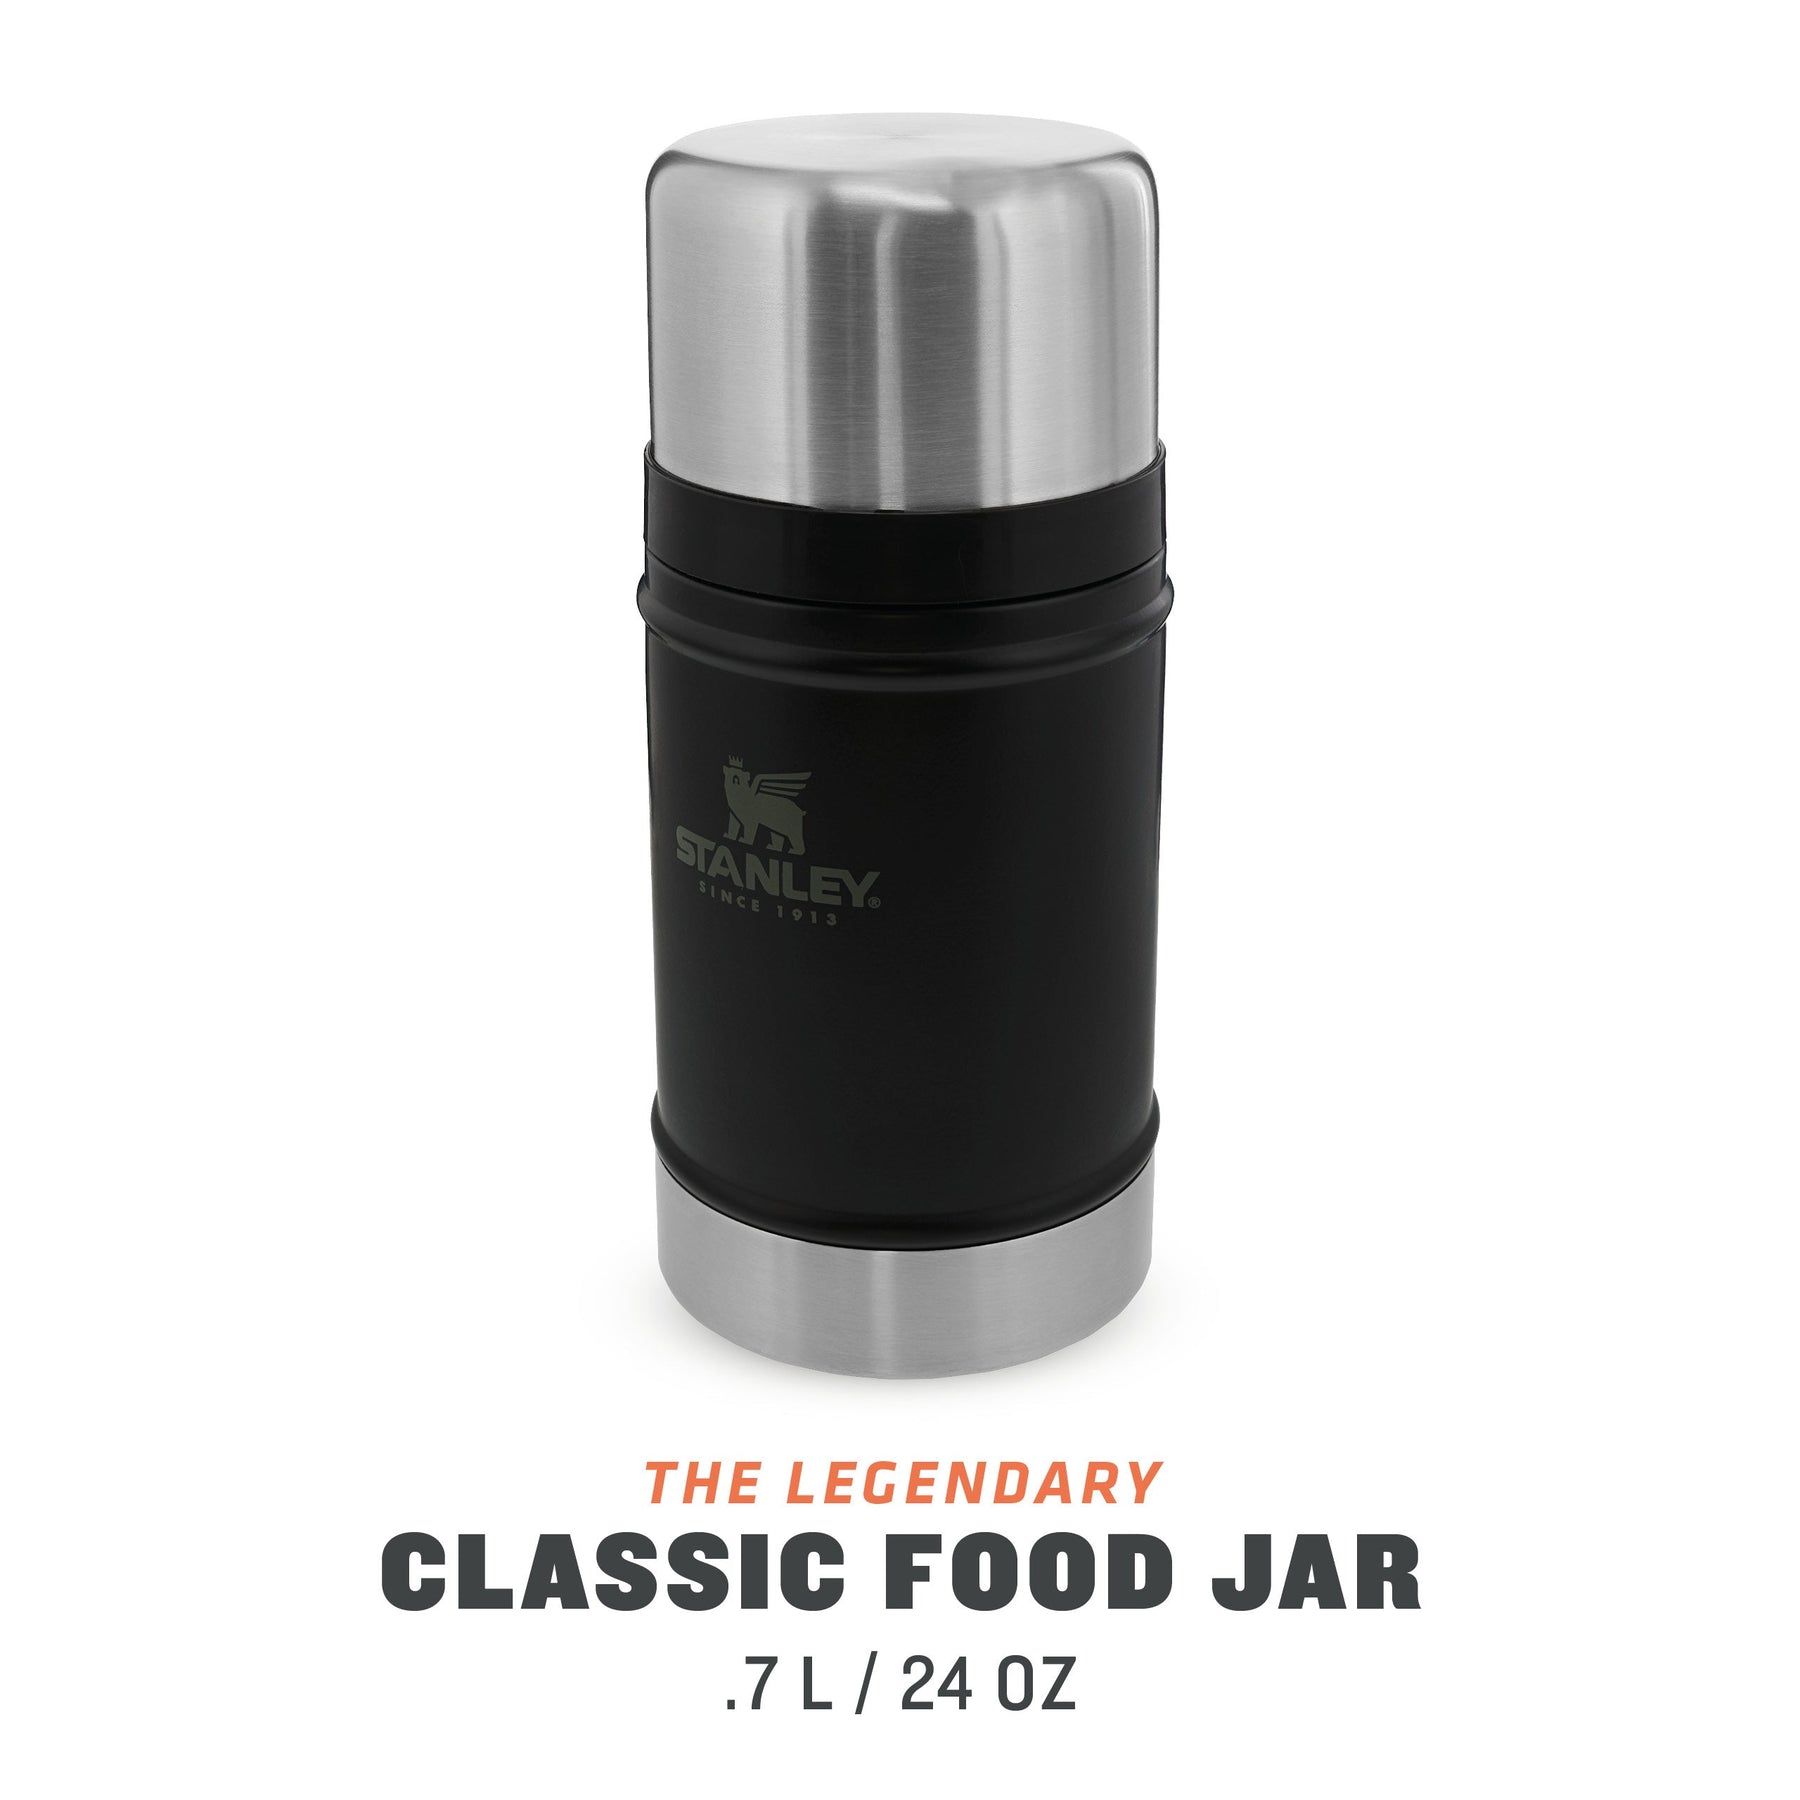  Stanley Classic Legendary Food Jar 0.4L Charcoal with